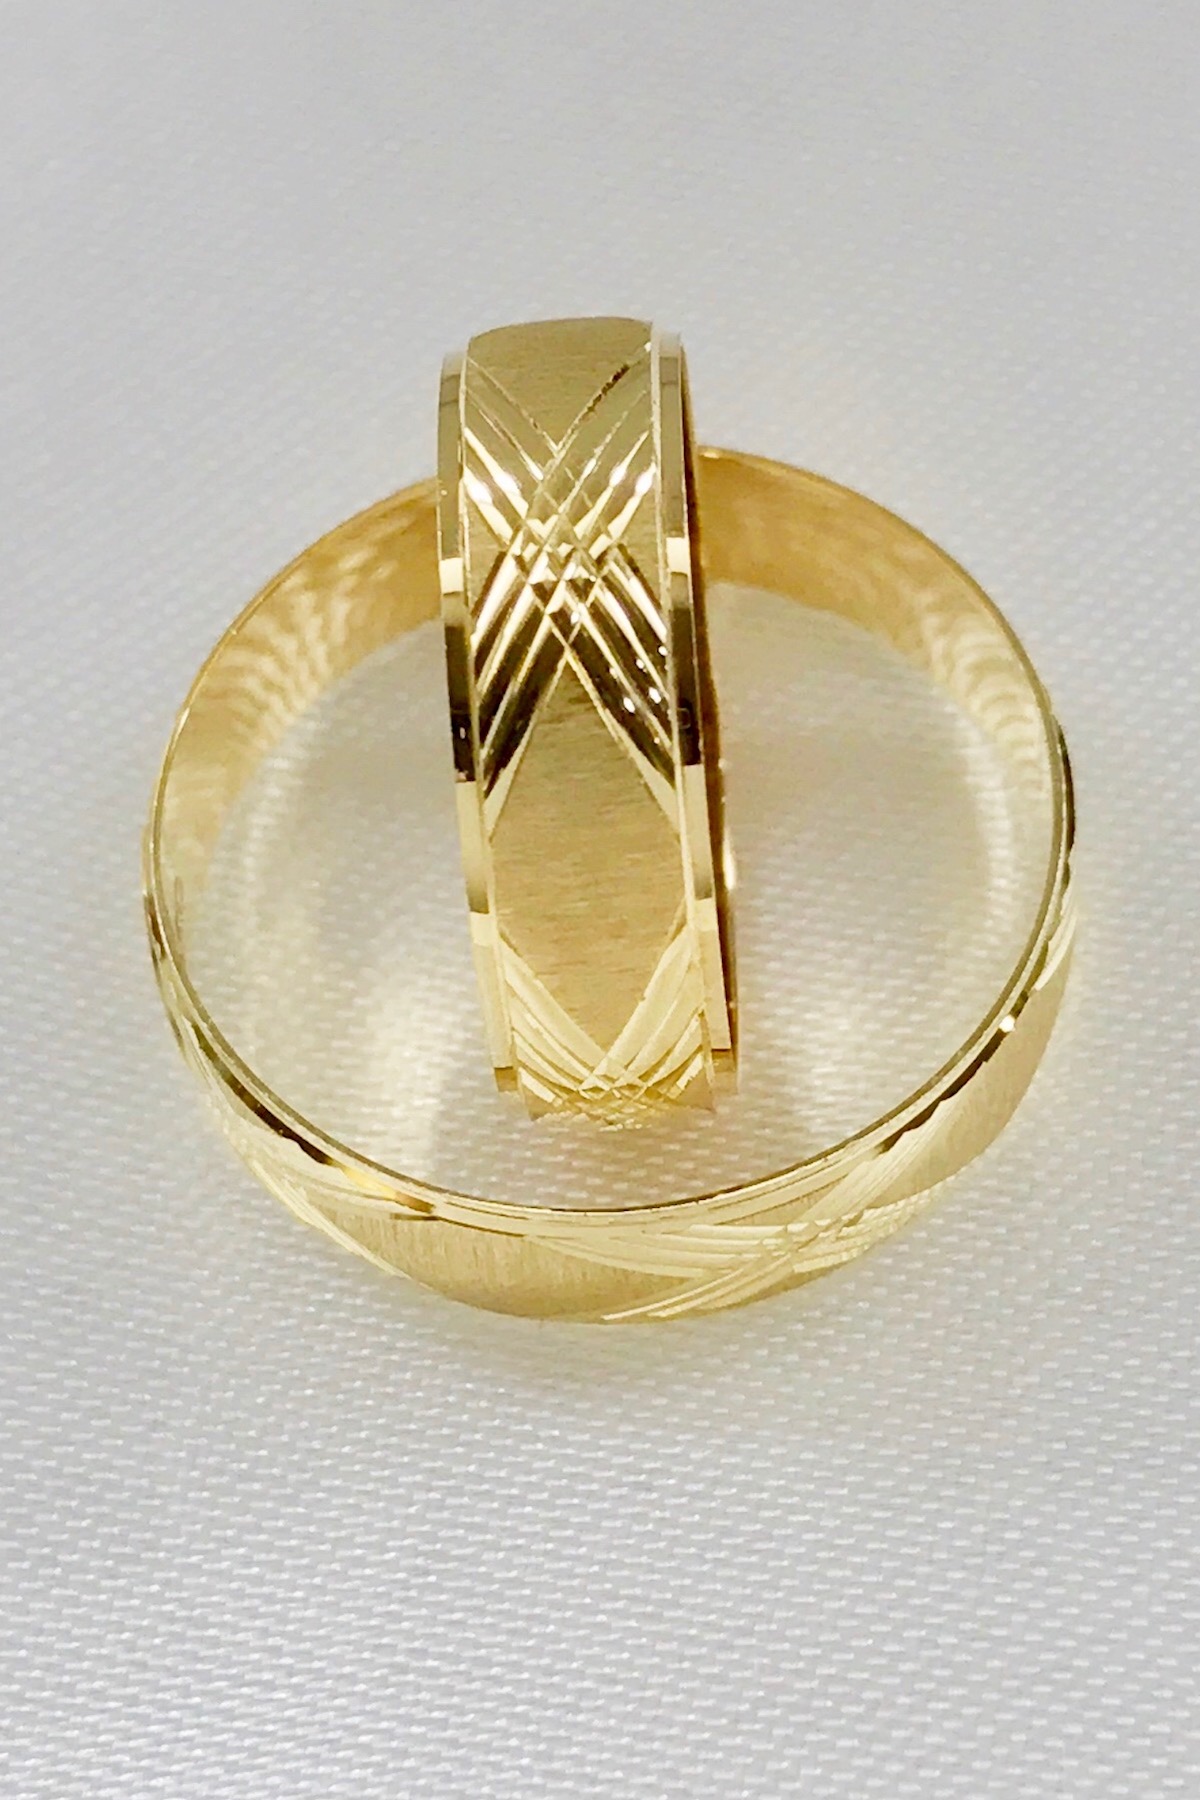  Affordable  18k Yellow Gold  Wedding  Rings  Philippines  Jay 